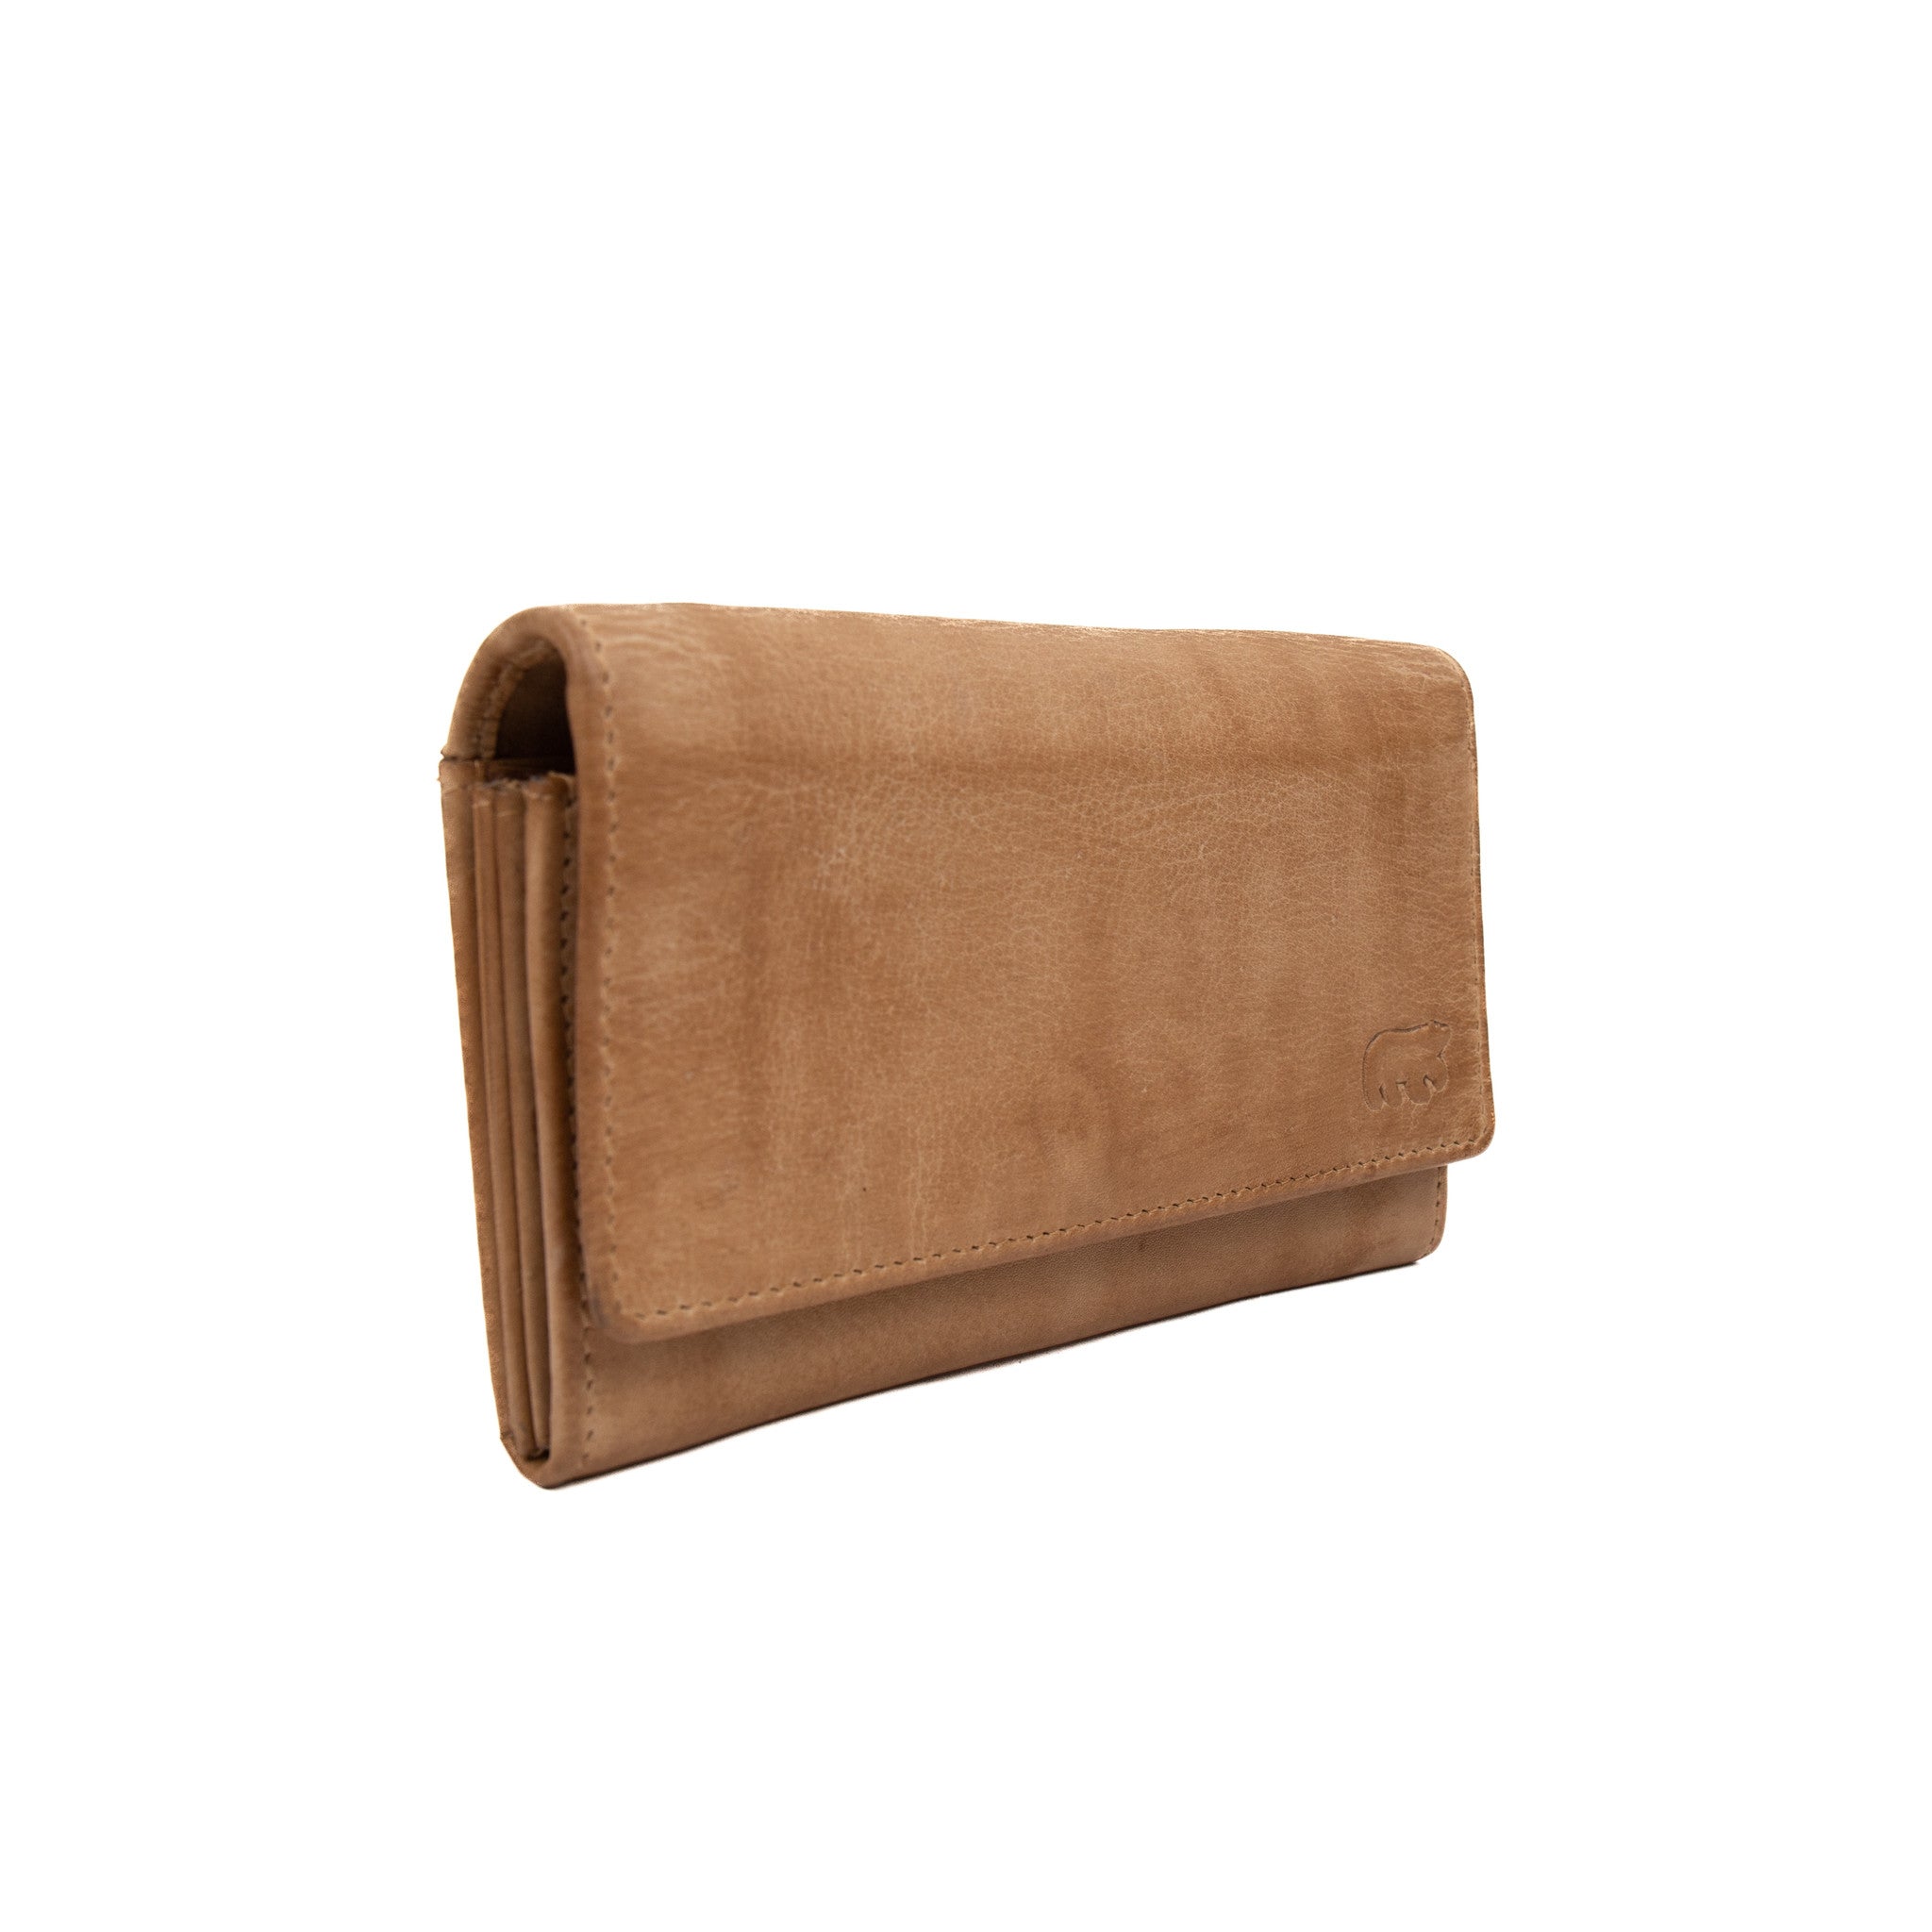 Wrap wallet 'Sigrid' ivory - CP 6096